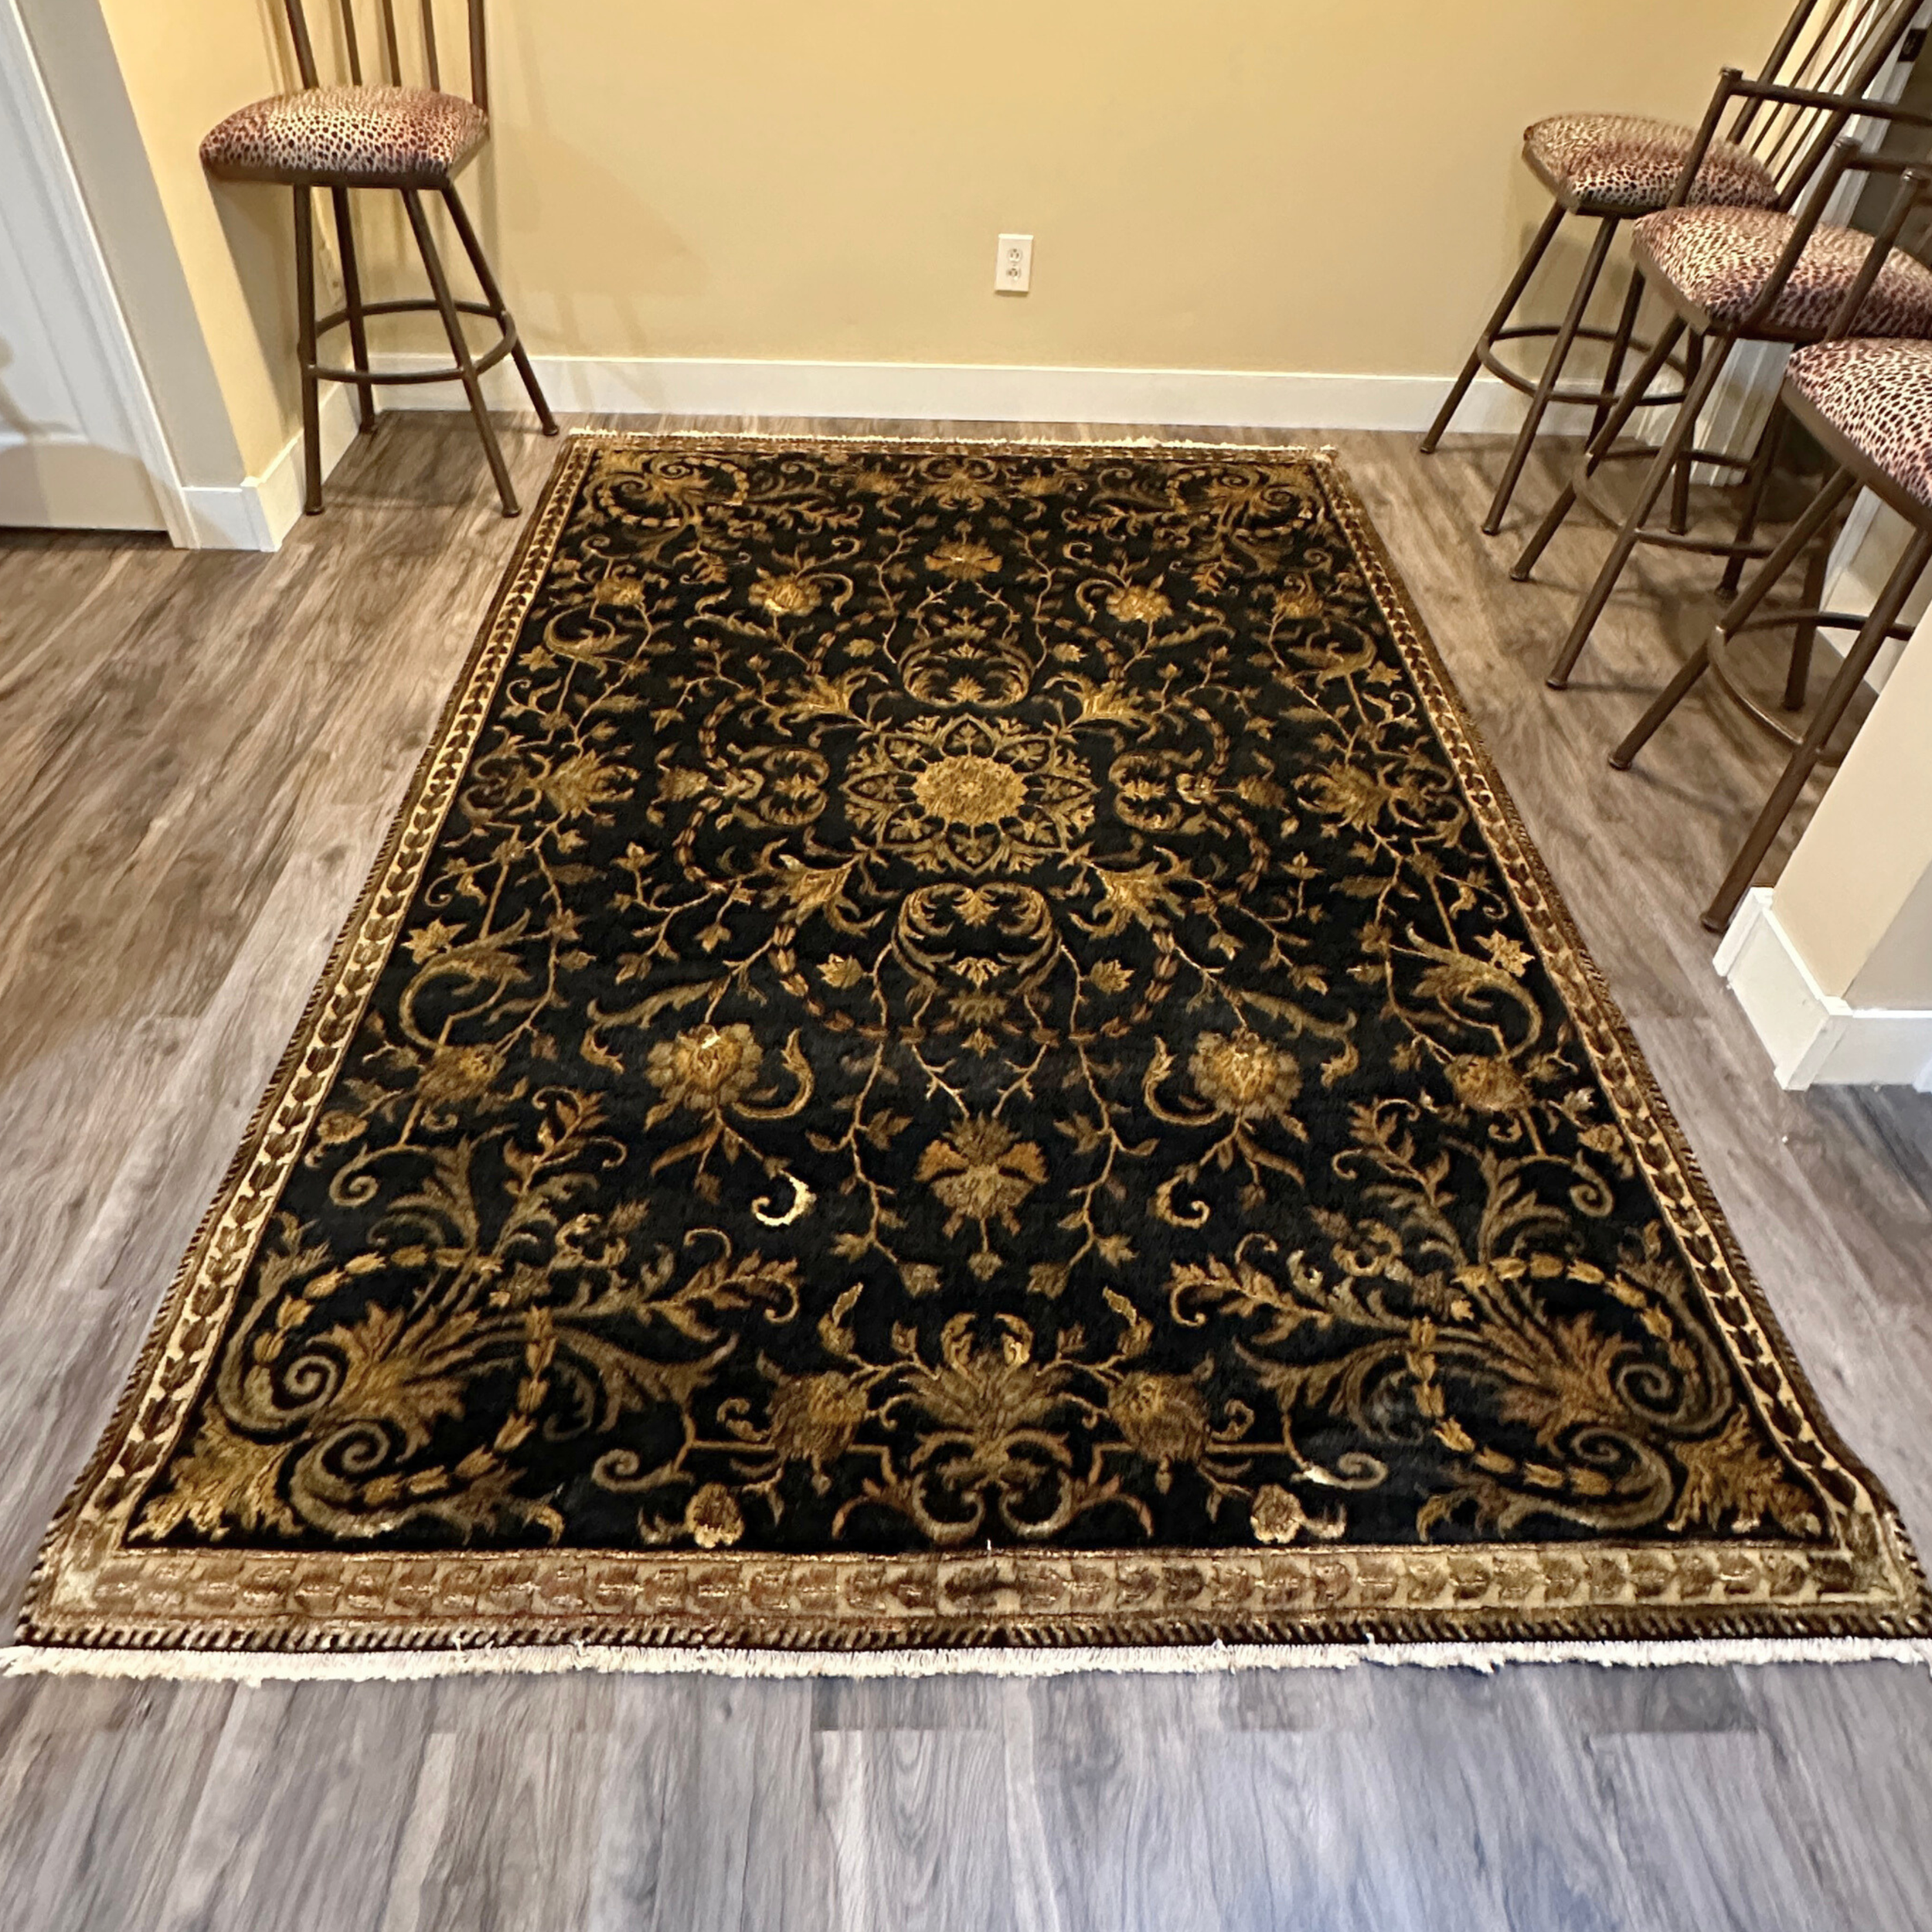 Black and Gold Silk Area Rug